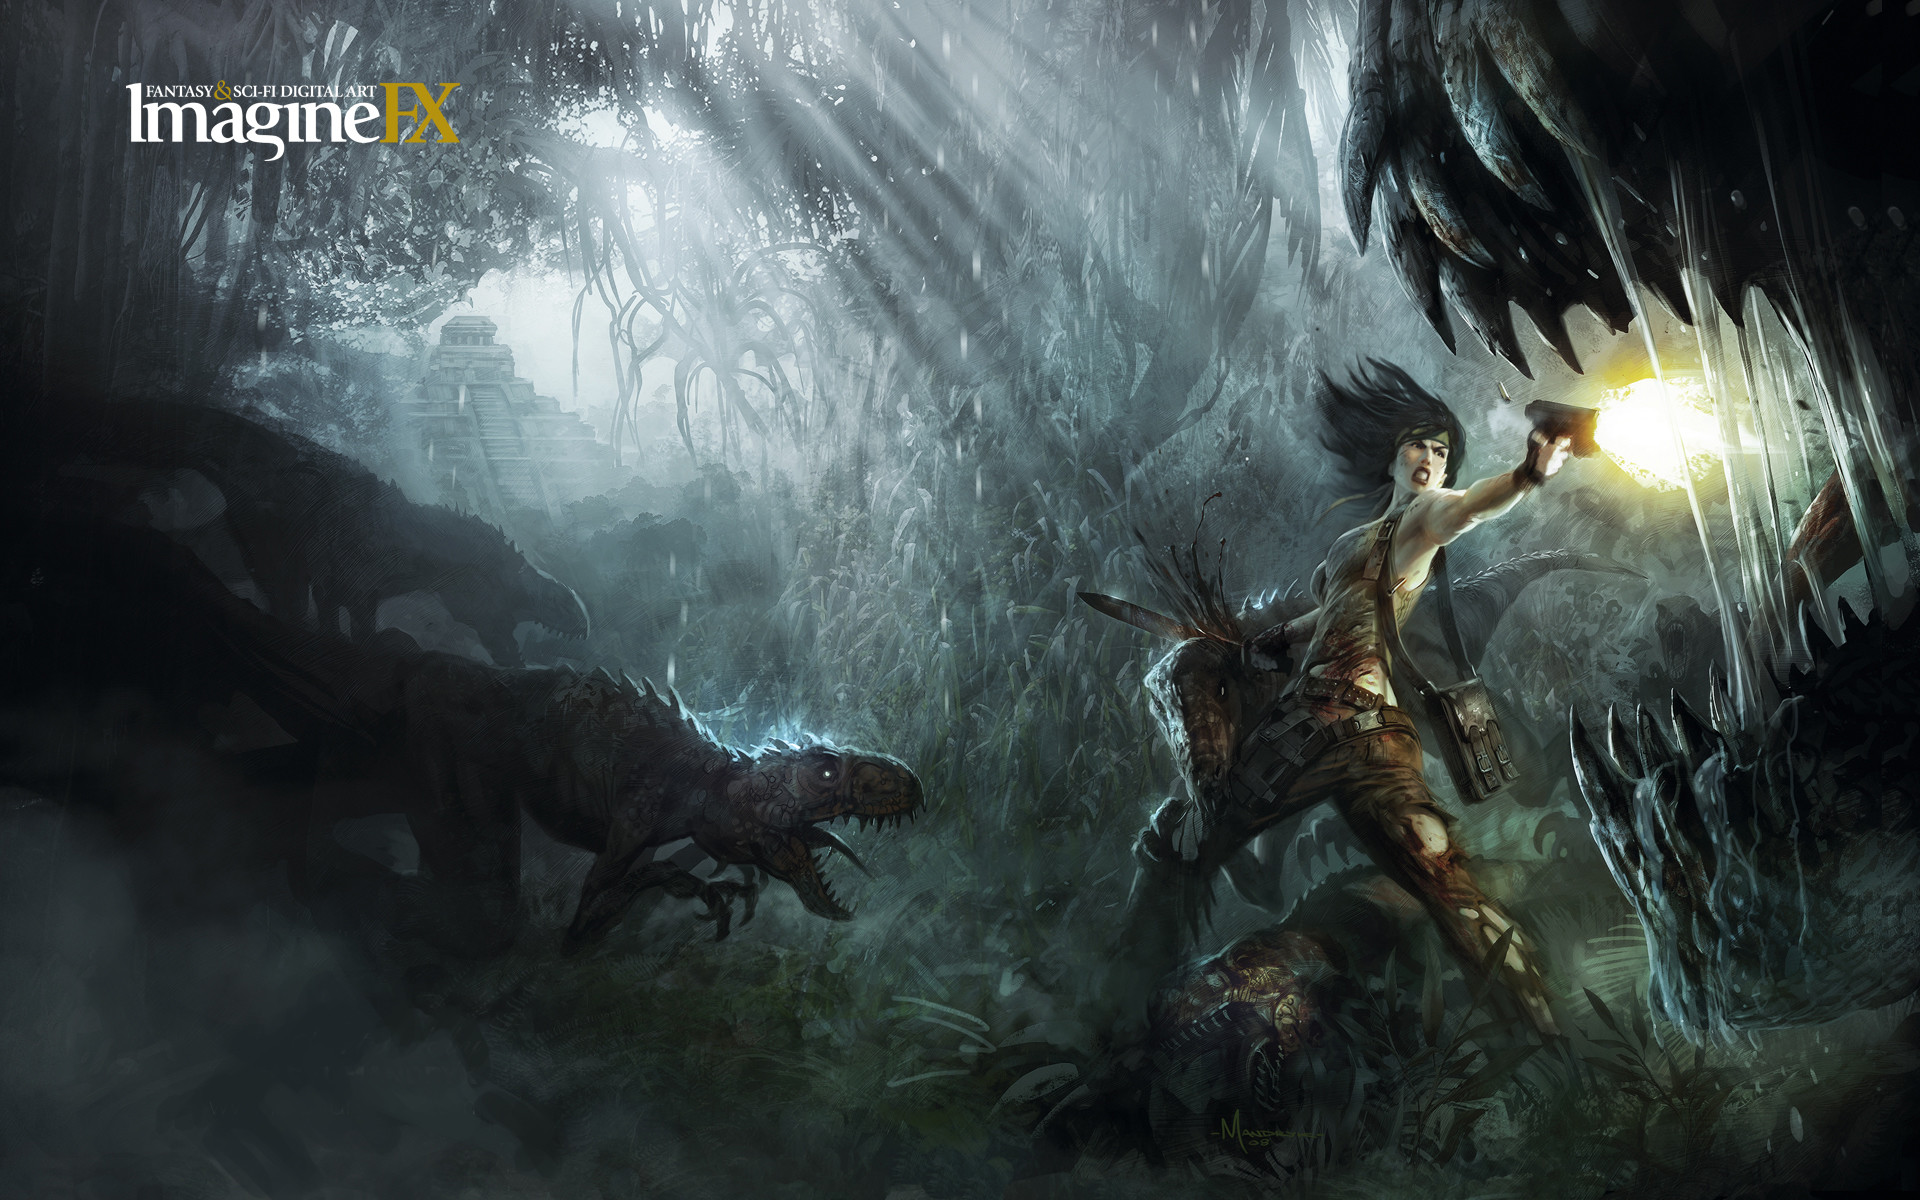 1920x1200 Women Forests Fighting Dinosaurs Fantasy Art Sunlight Girls With Guns Torn  Clothing Imagine Fx Wallpaper At Fantasy Wallpapers